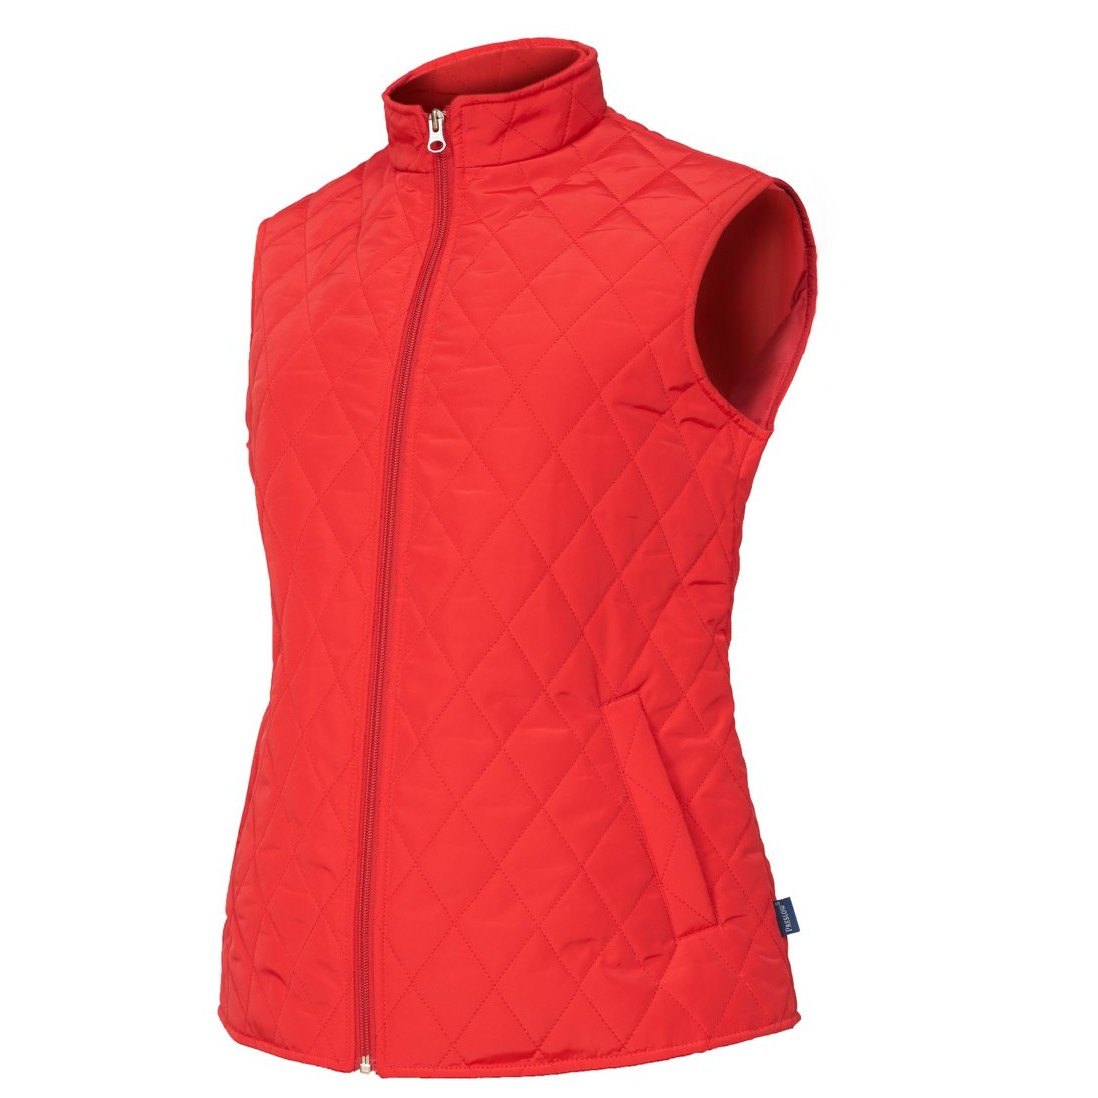 Unisex Fine Polyester Vest- Leon Style - Red Color Made